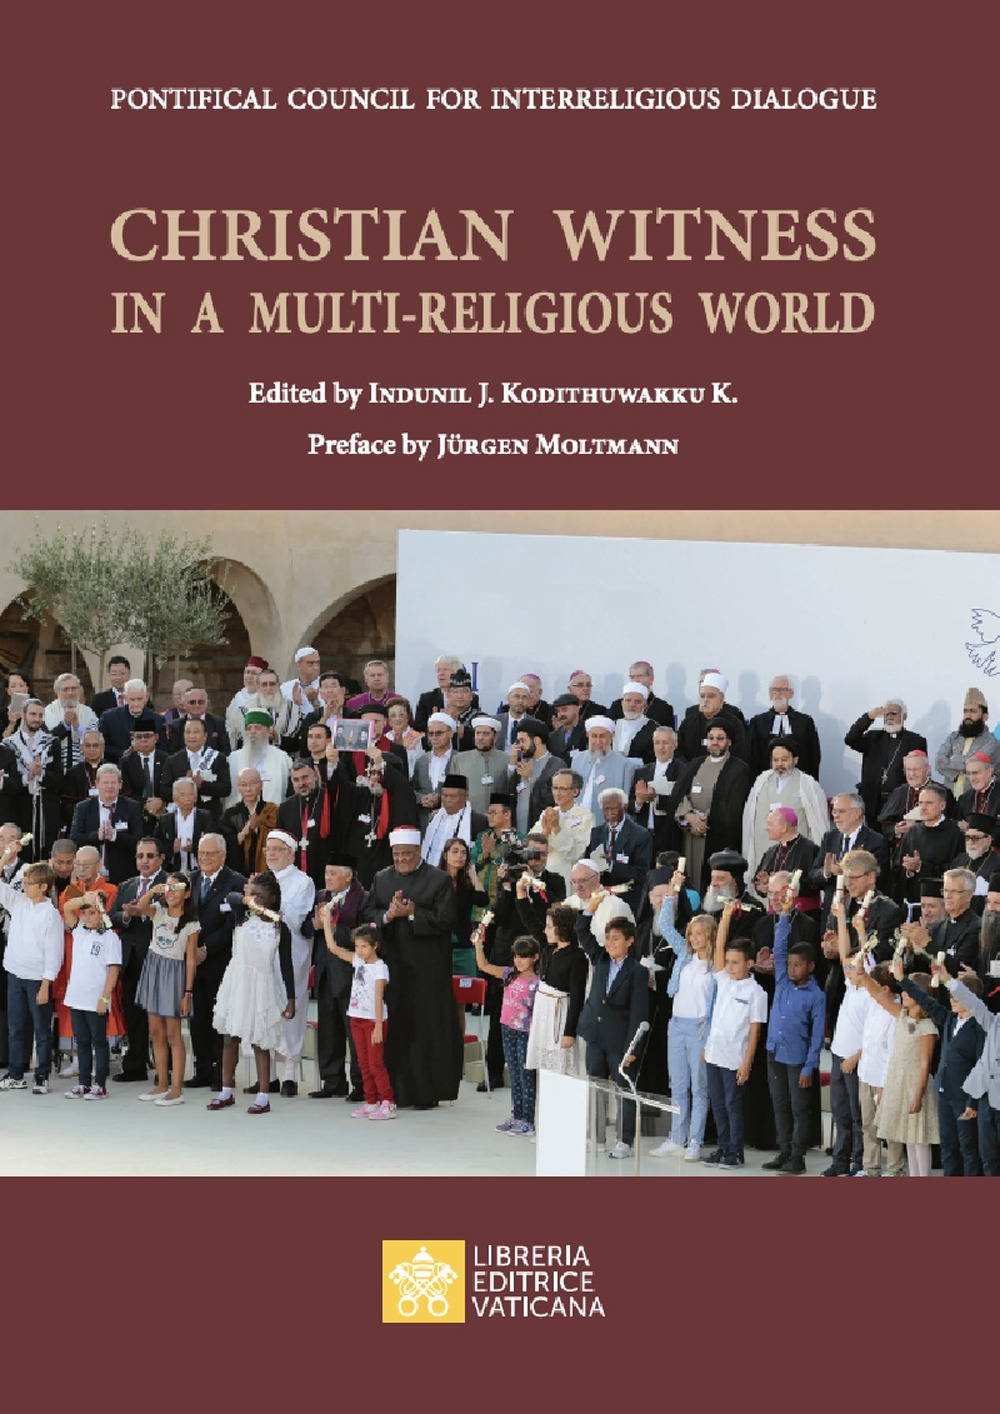 Christian witness in a multi-religious world